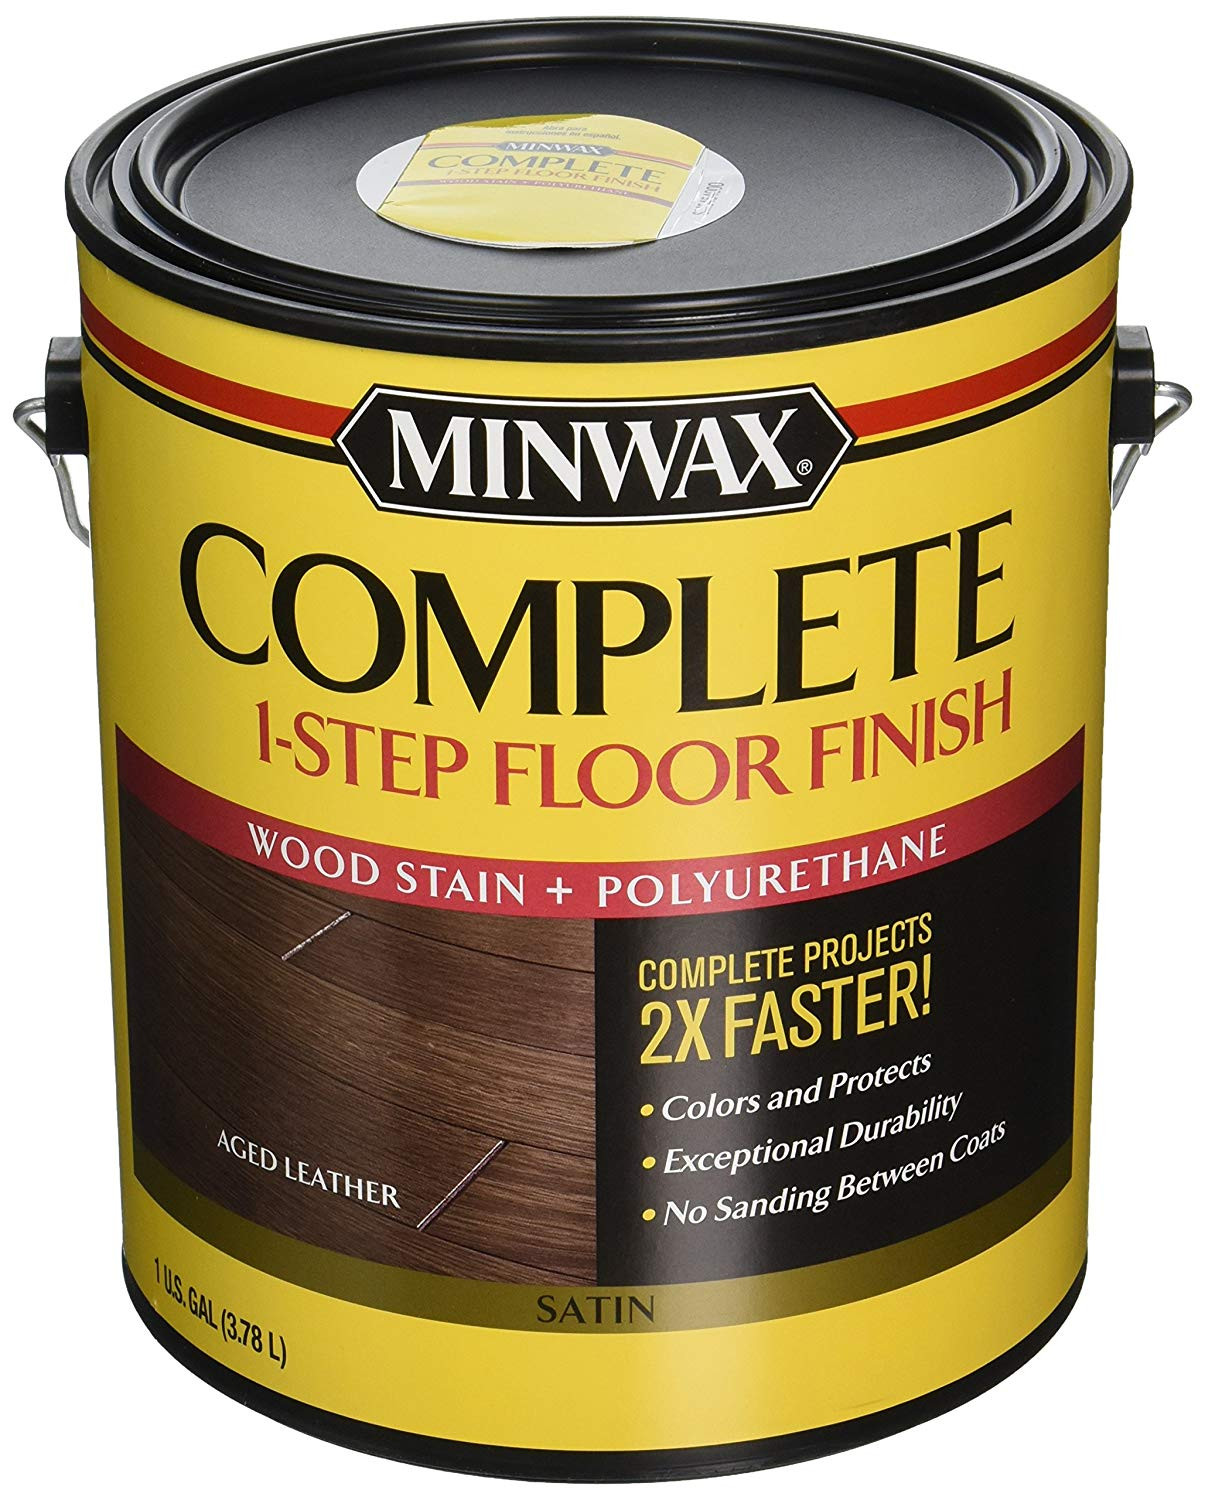 22 Trendy Pc Hardwood Floors Reviews 2024 free download pc hardwood floors reviews of minwax 672050000 67205 1g satin aged leather complete 1 step floor with minwax 672050000 67205 1g satin aged leather complete 1 step floor finish amazon com